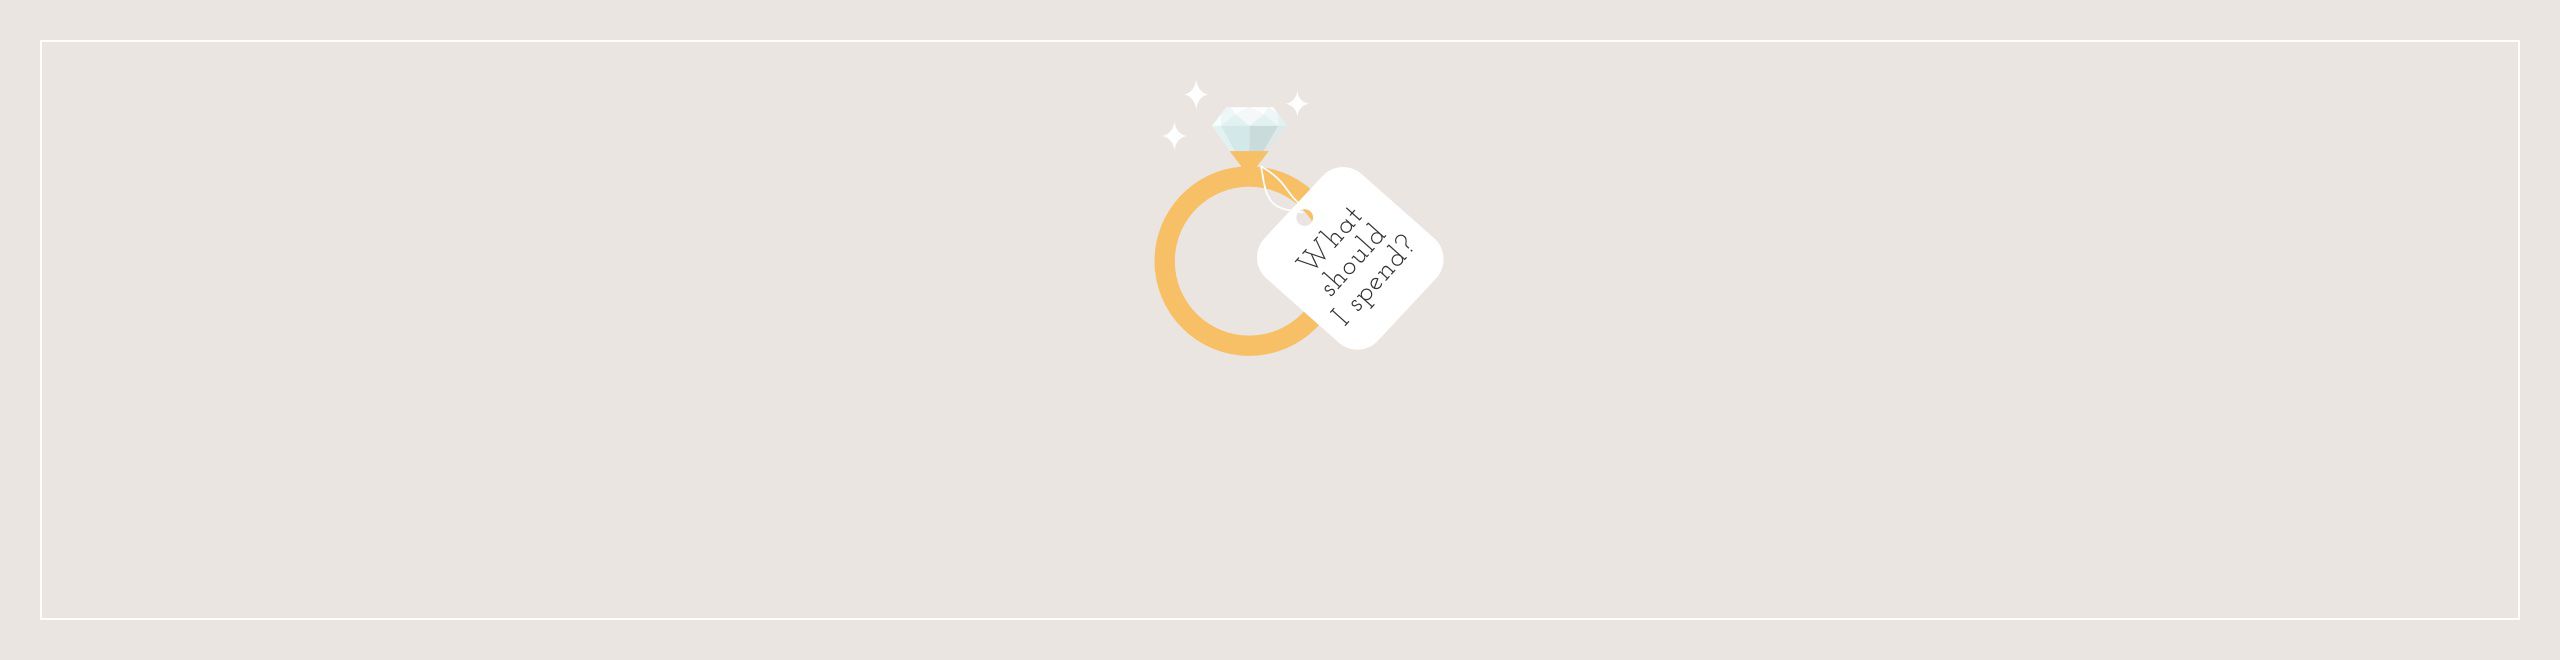 An illustration of an engagement ring with a price tag attached